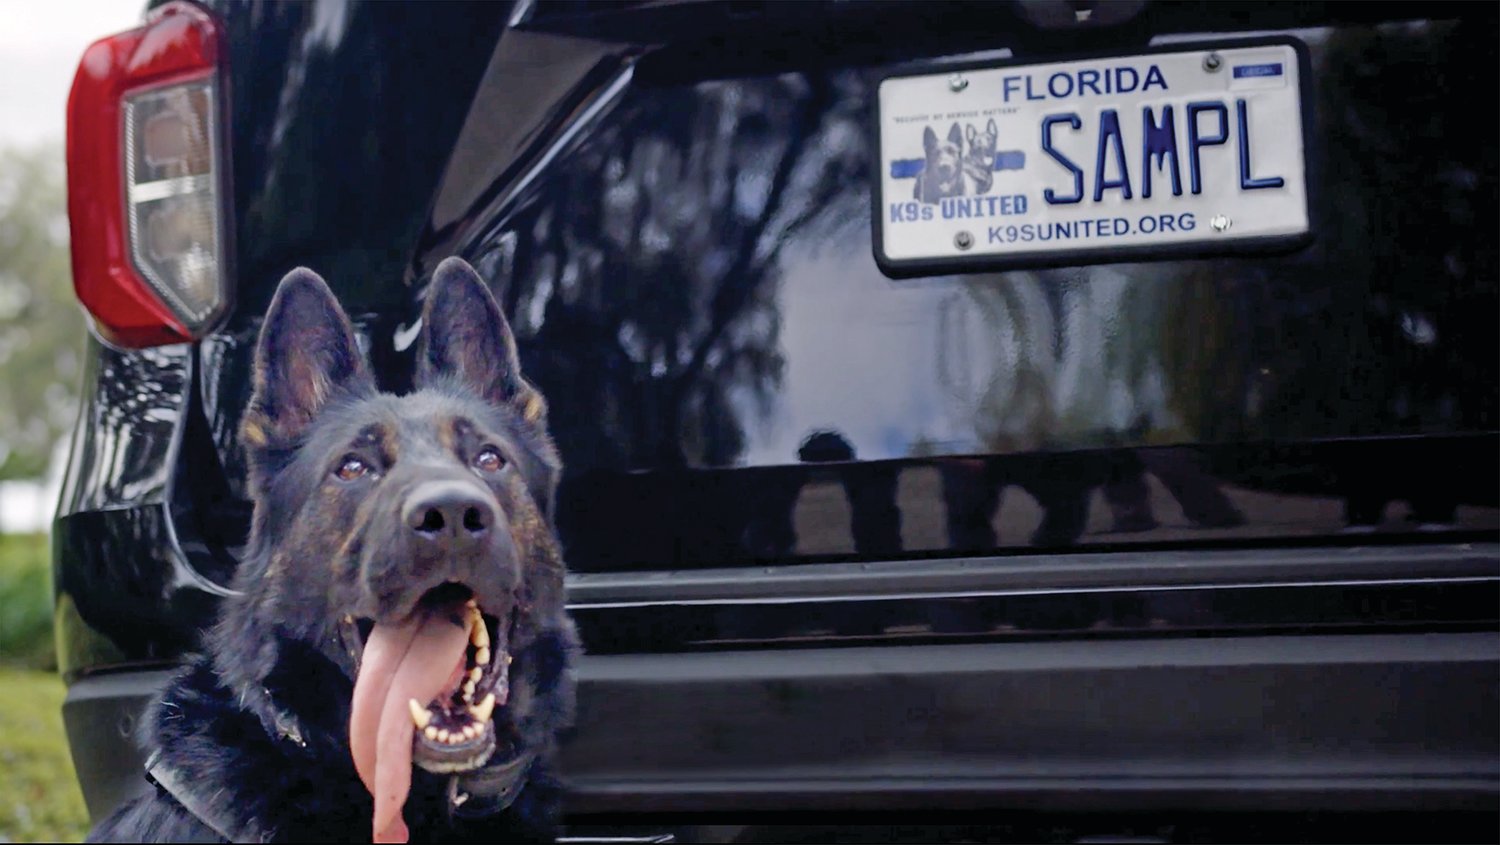 The K9s United specialty license plates can be preordered by Florida residents with active state driver’s licenses for $33 from any authorized motor vehicle service center throughout the state of Florida (in person or online), or from the K9s United website for $34.